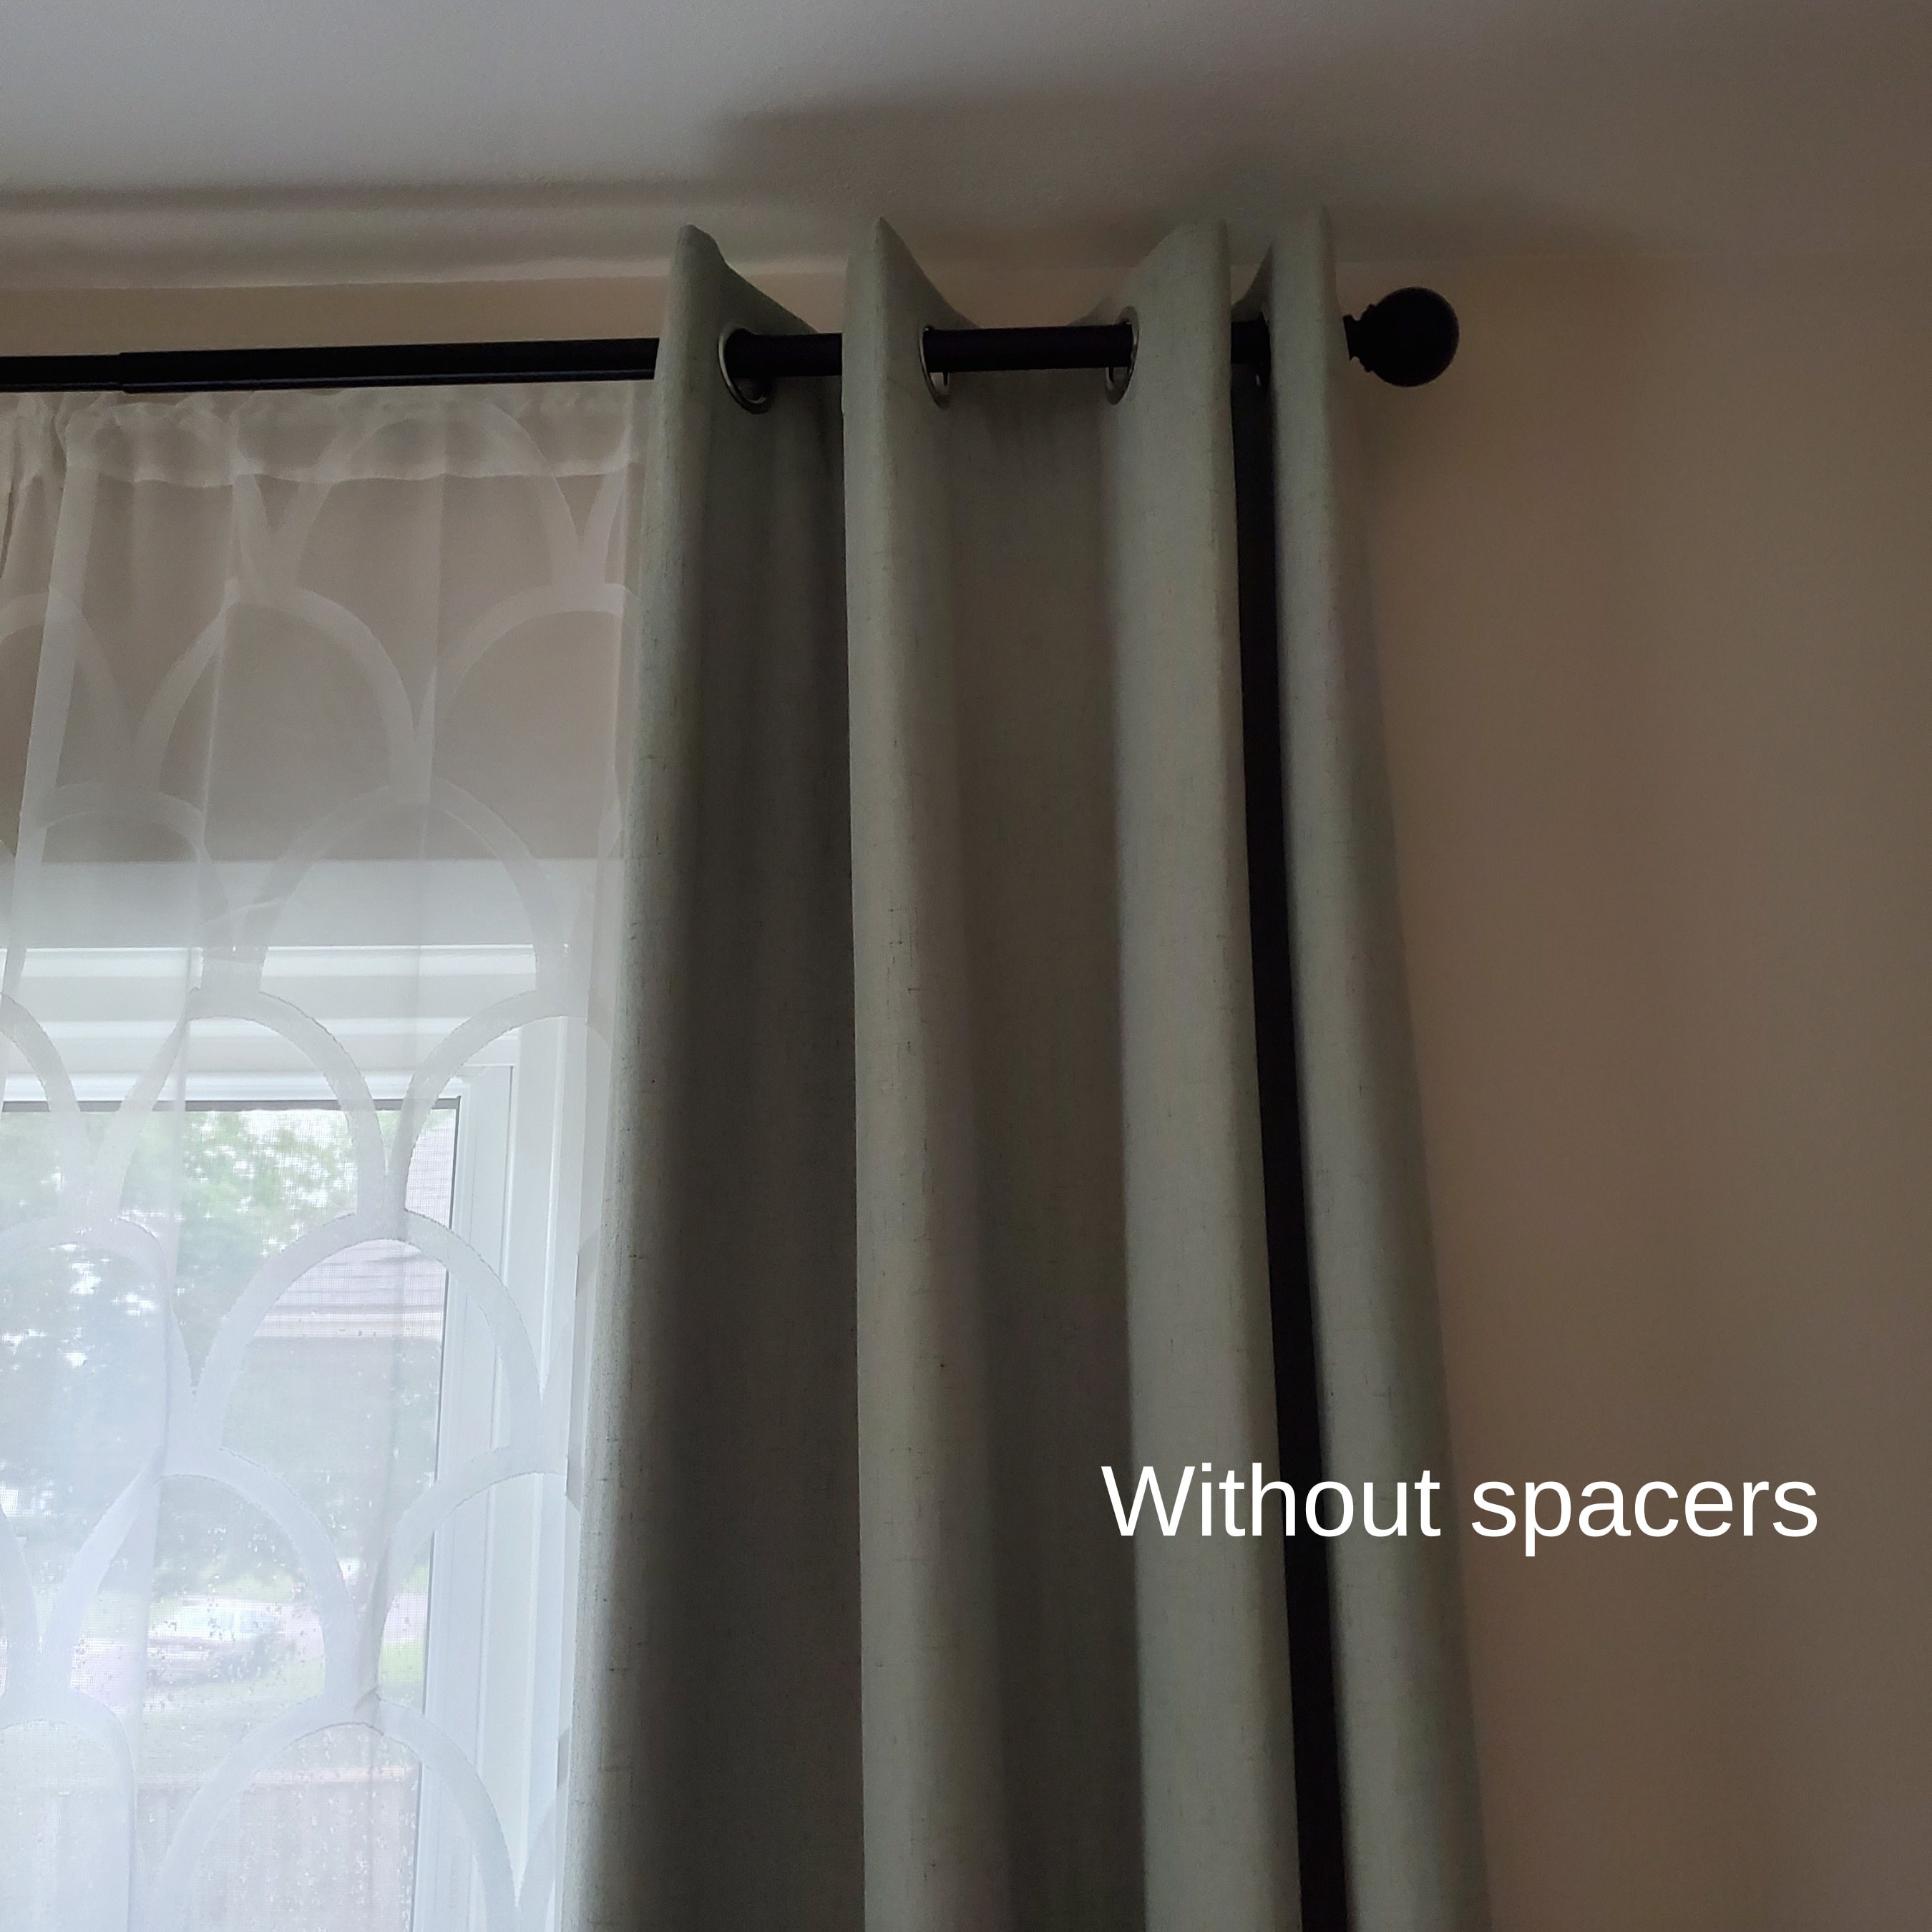 Curtain Spacers - Powered By Prinnovate